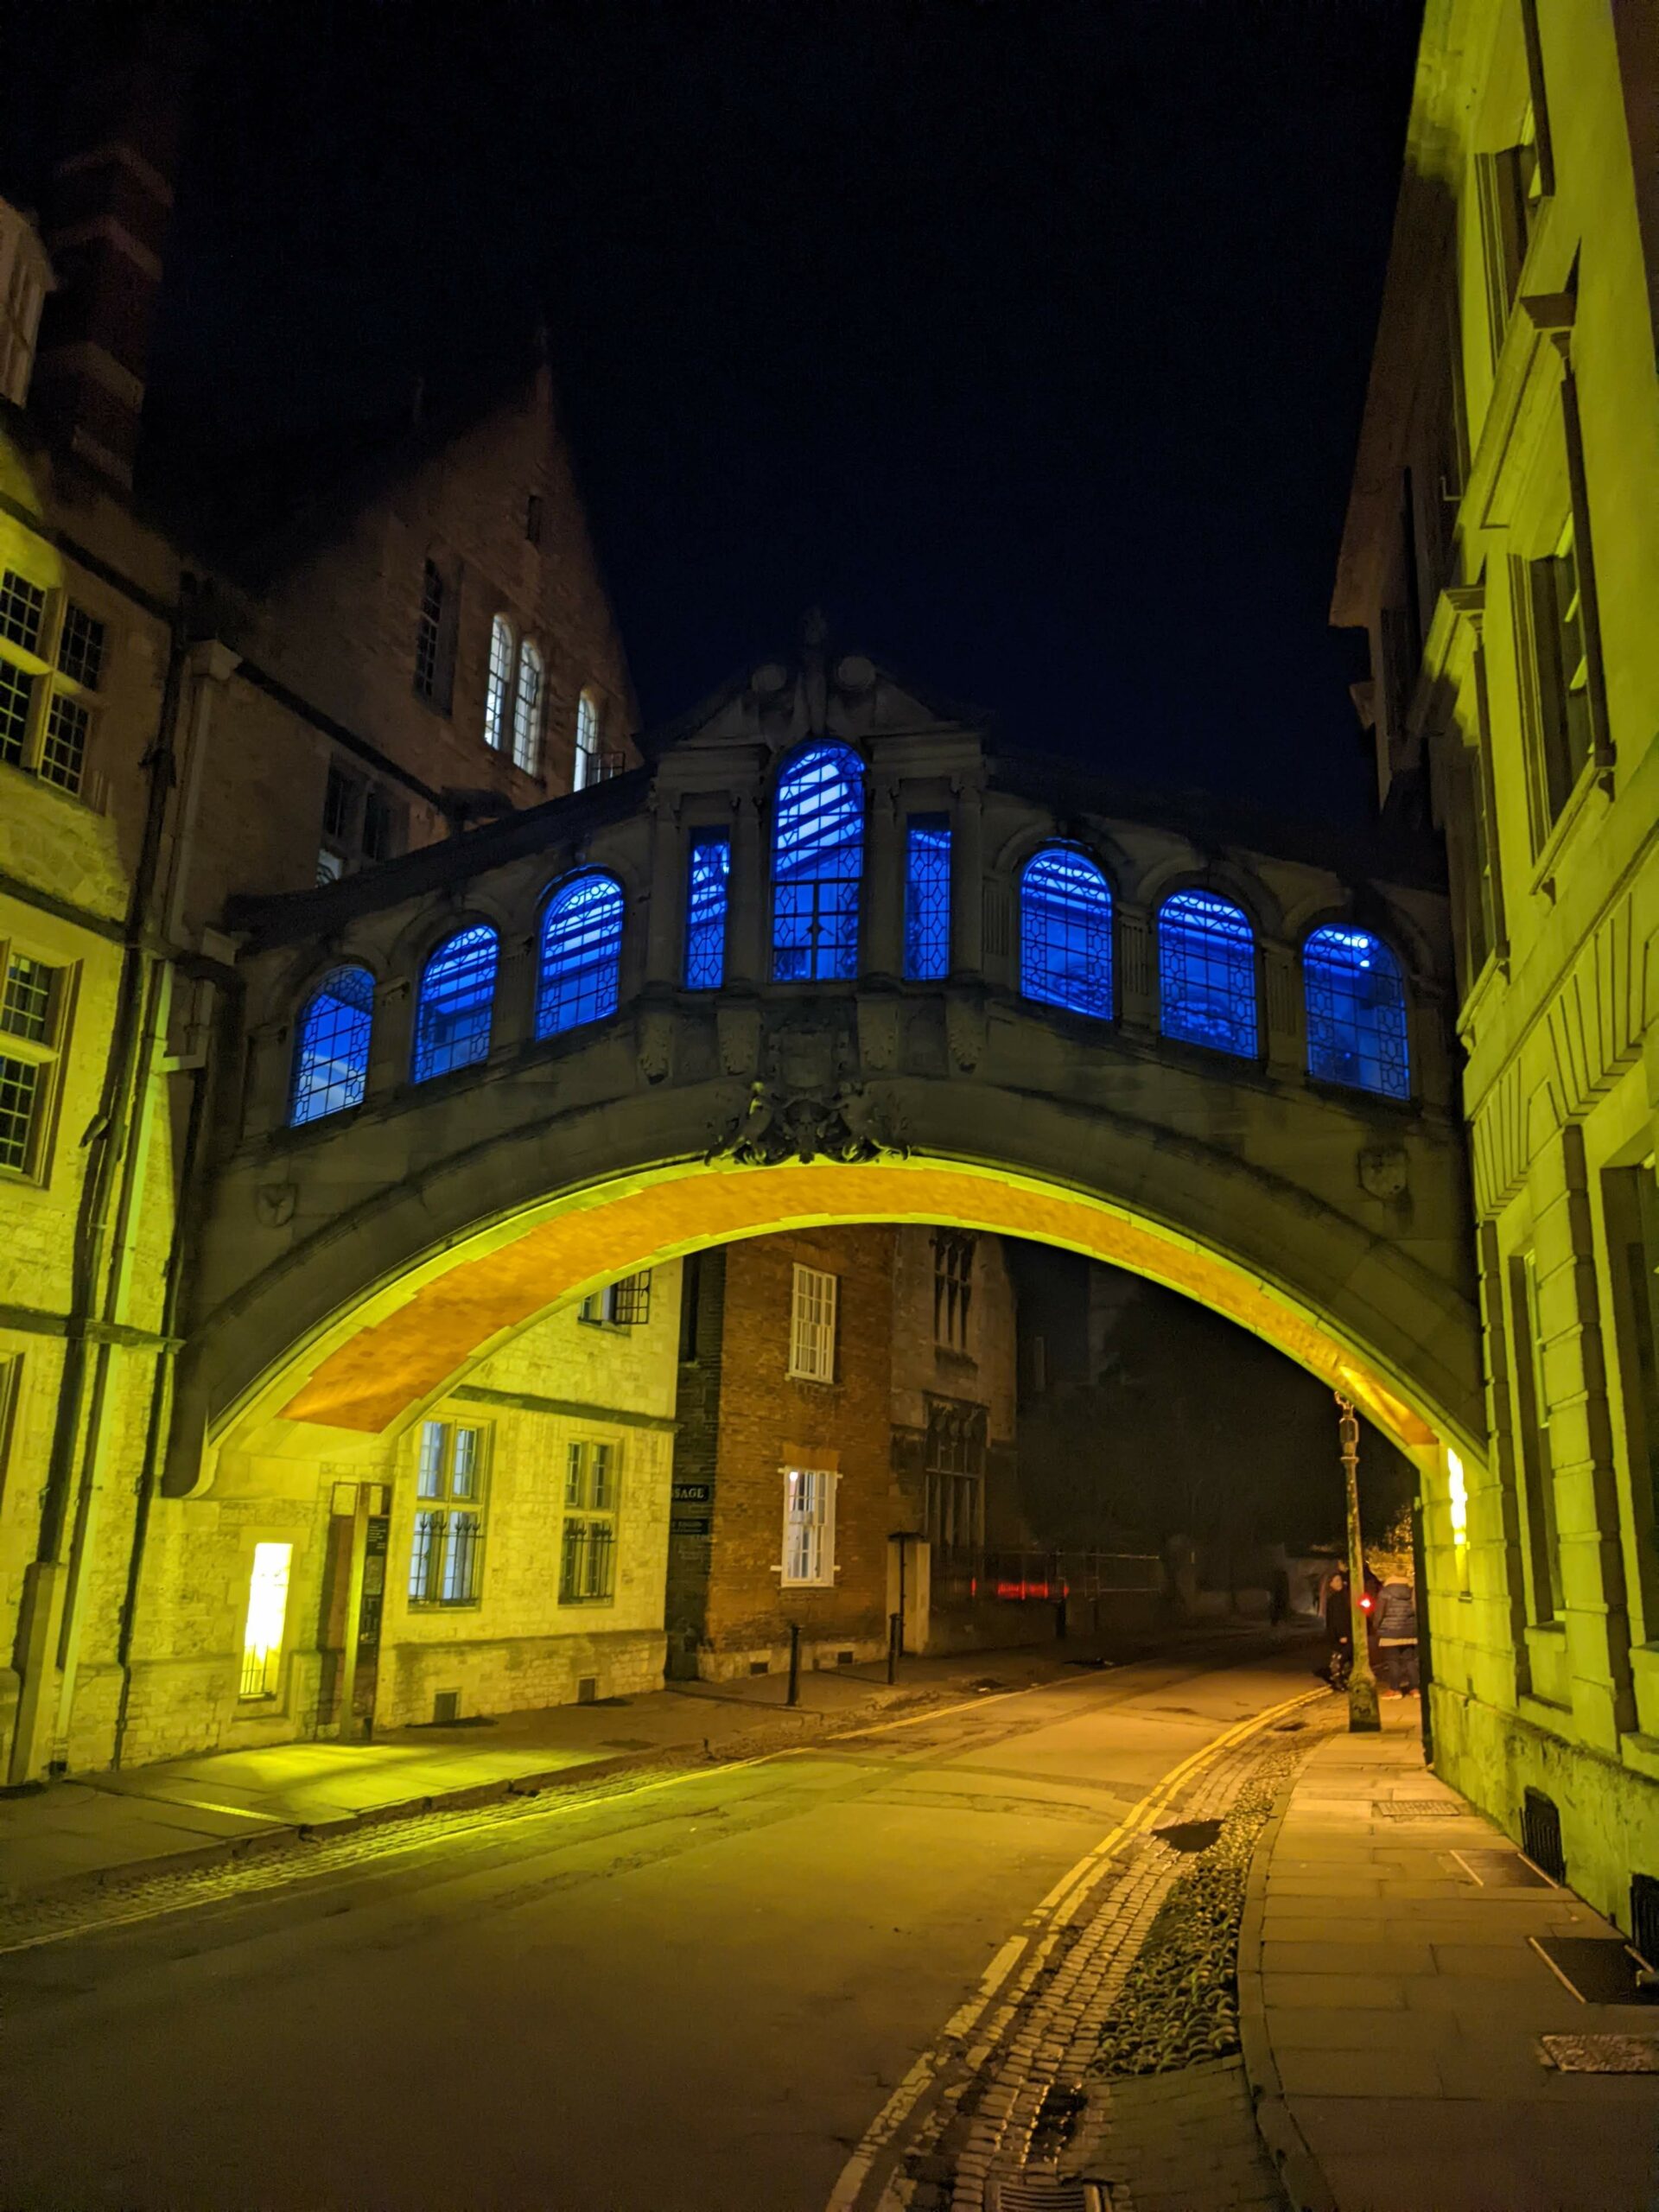 Night-time photograph of stone bridge illuminated in yellow with blue lights shining from windows